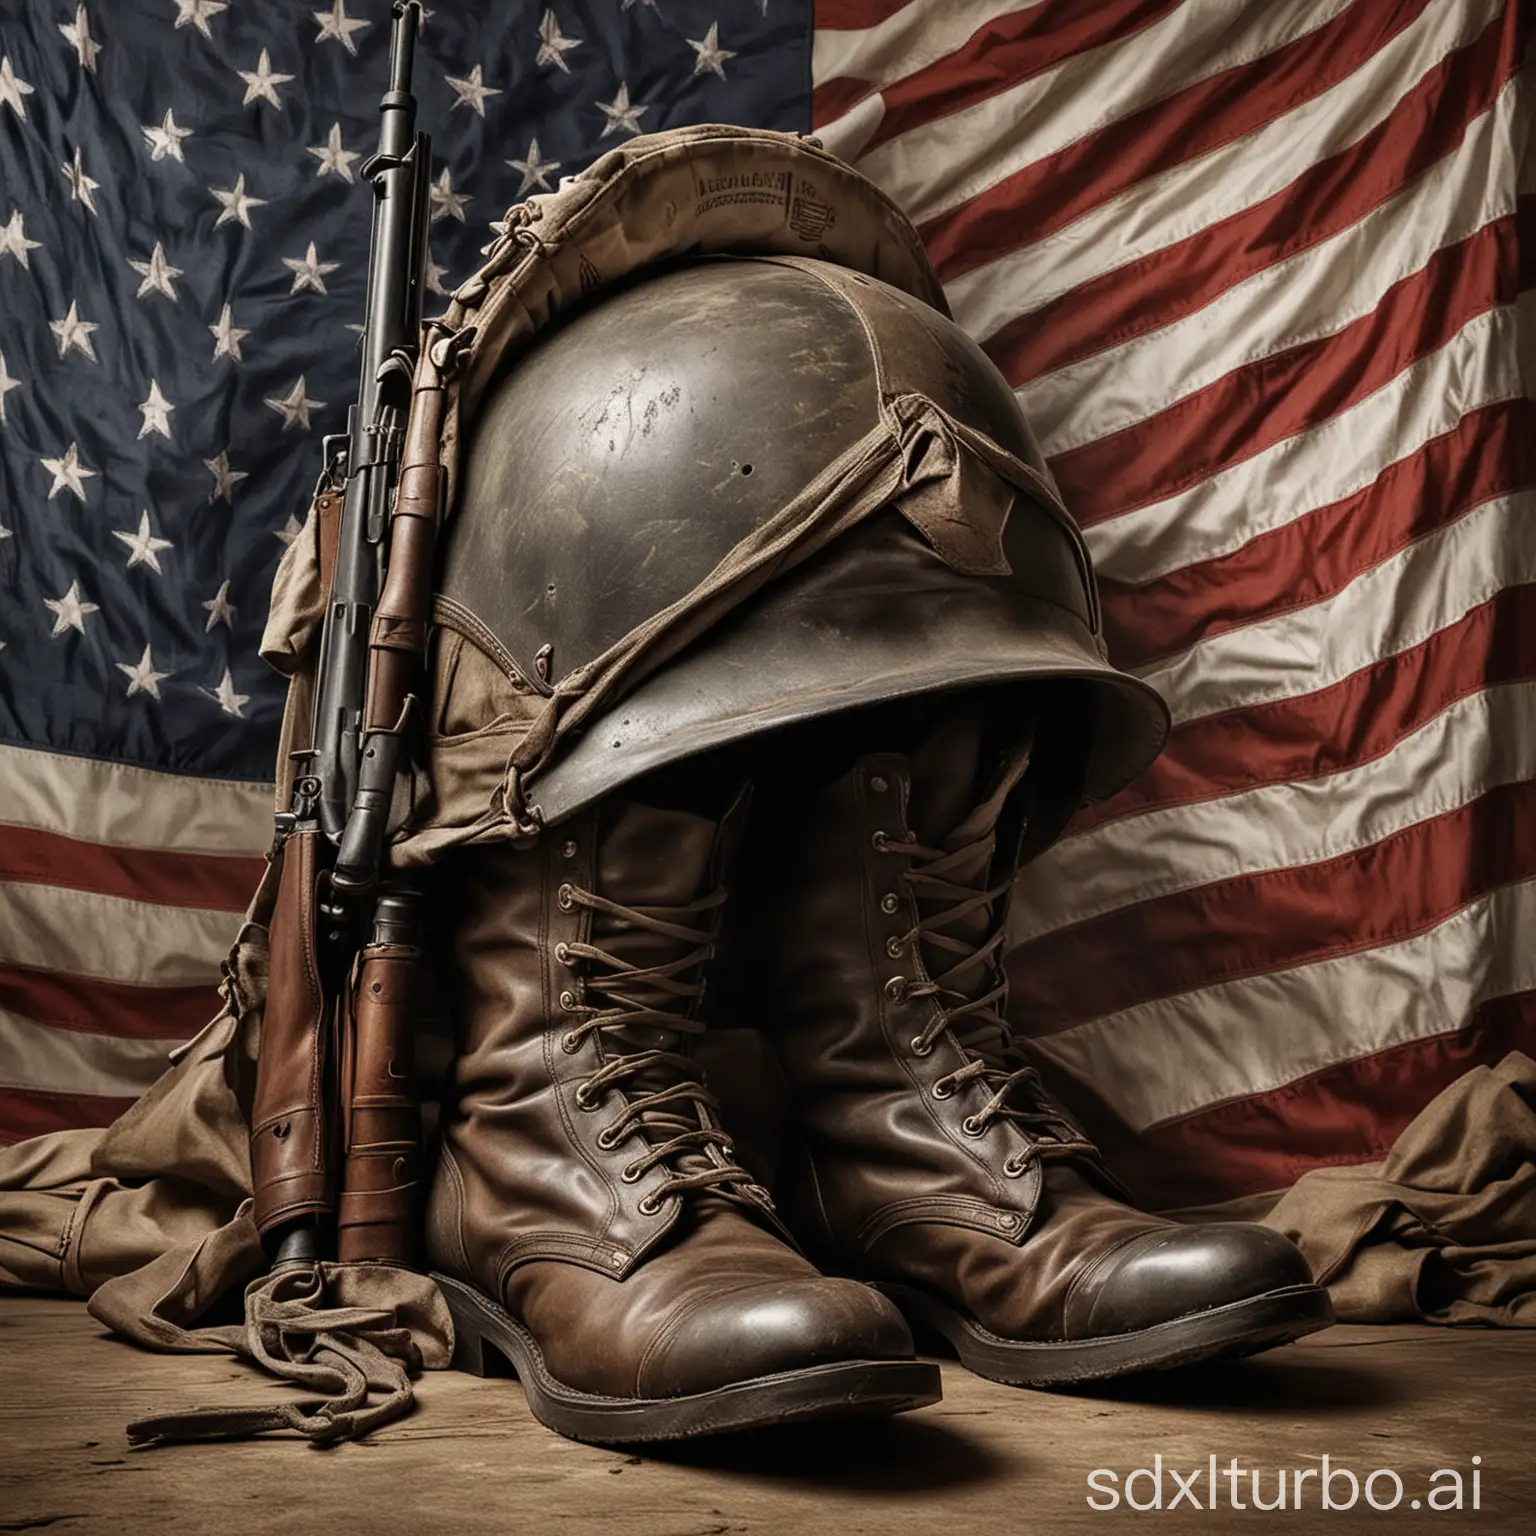 Military-Tribute-Soldiers-Helmet-Rifle-and-Boots-with-American-Flag